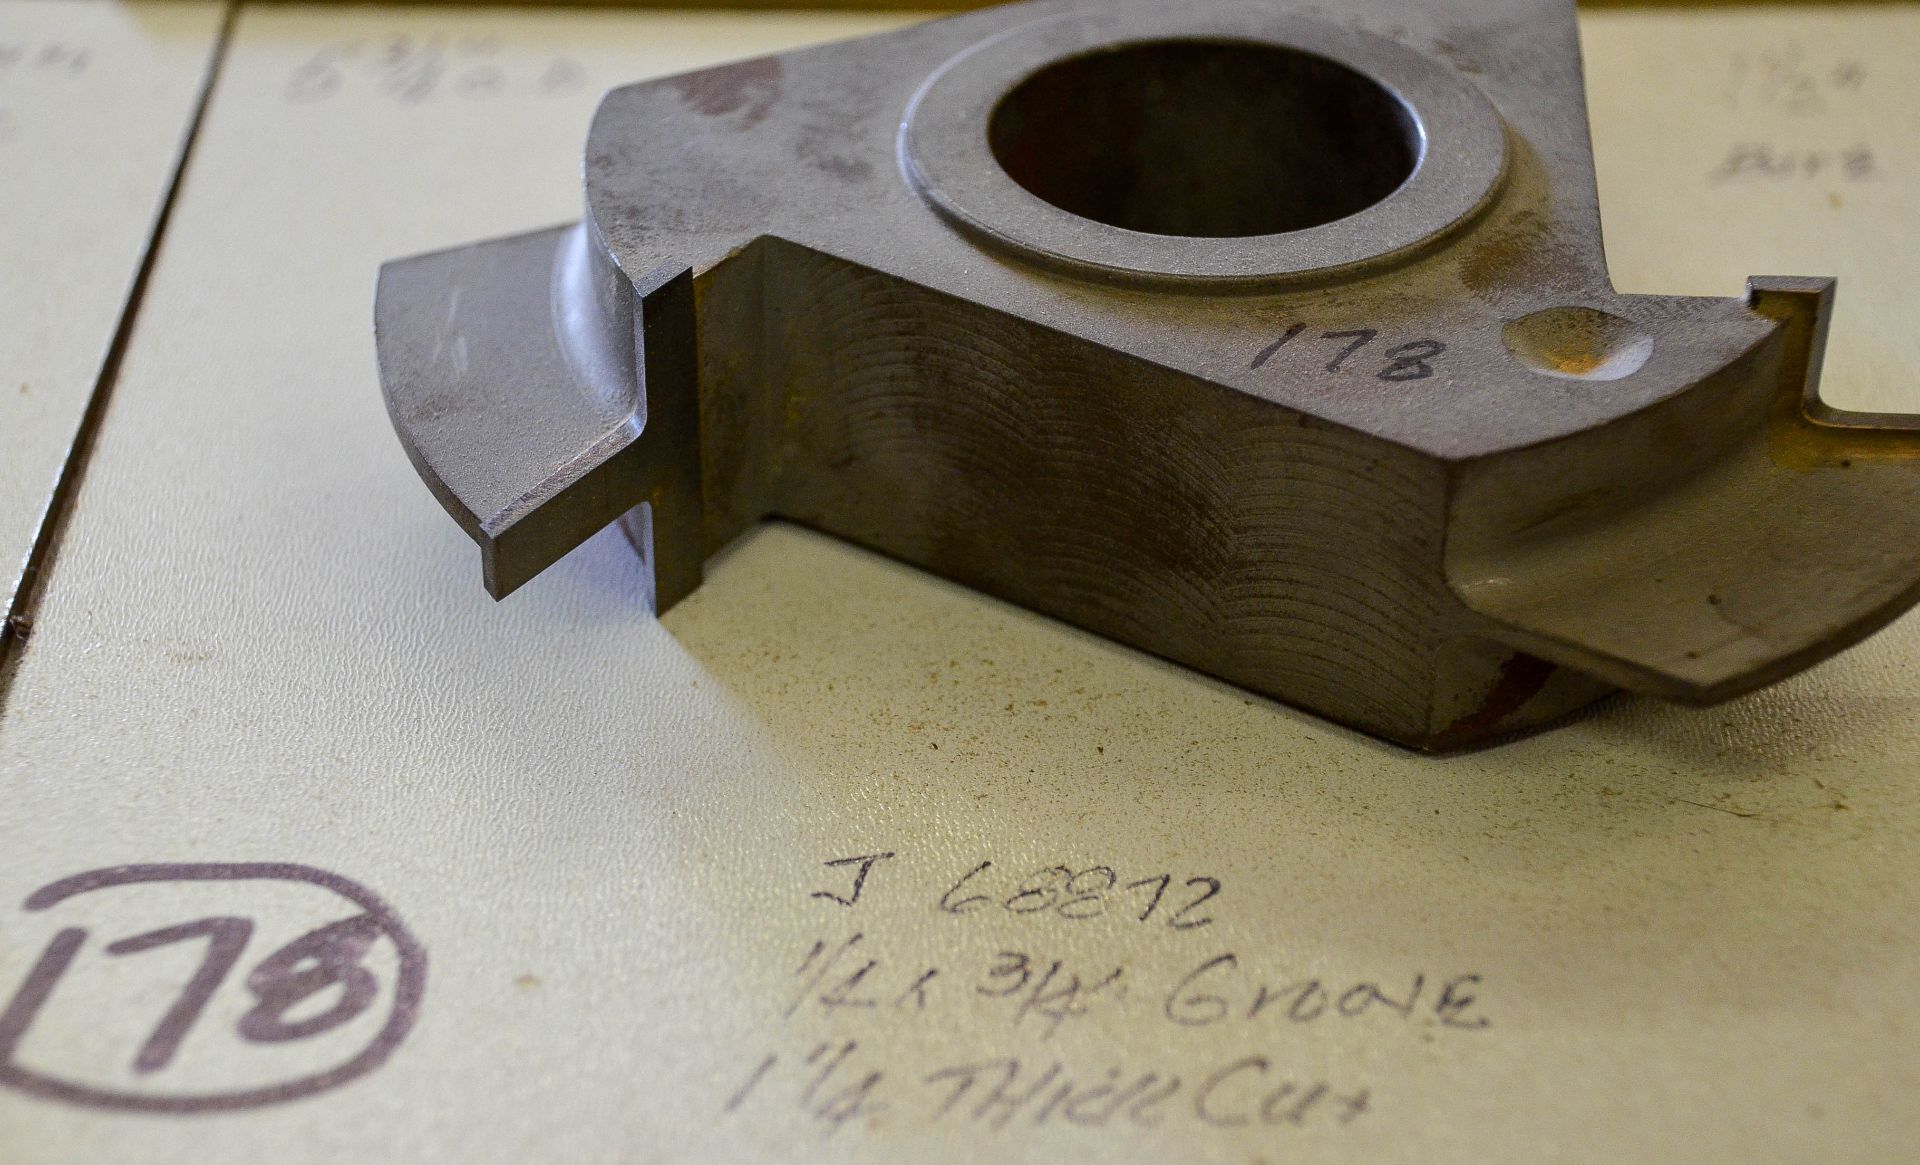 Shaper Cutter, Carbide Chipped at 1 Wing by Handling, Edge Detail, 1" Thick Cut, 3/4" Wide, 5-1/ - Image 2 of 3